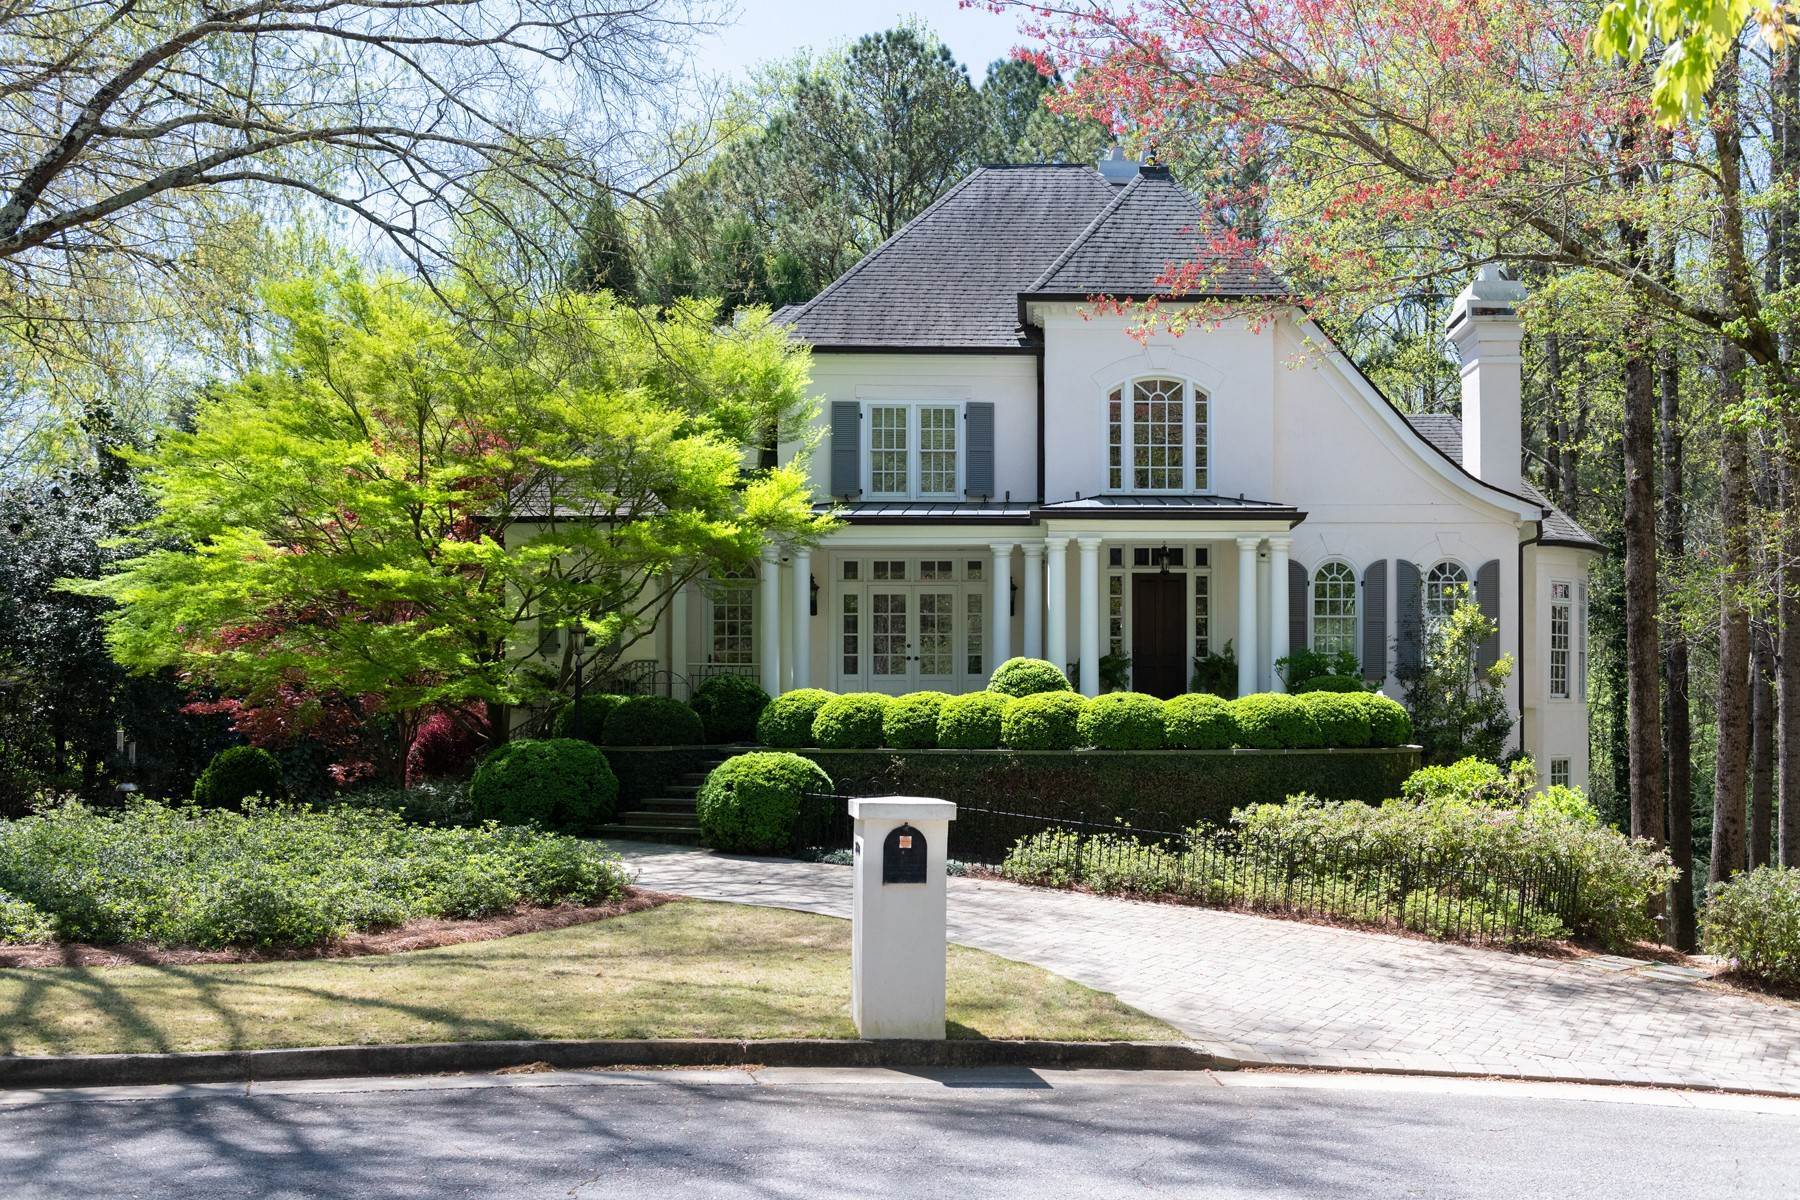 Single Family Homes for Sale at Beautifully Maintained Home at the End of a Quiet Cul-de-sac 2780 Carmon on Wesley NW Atlanta, Georgia 30327 United States